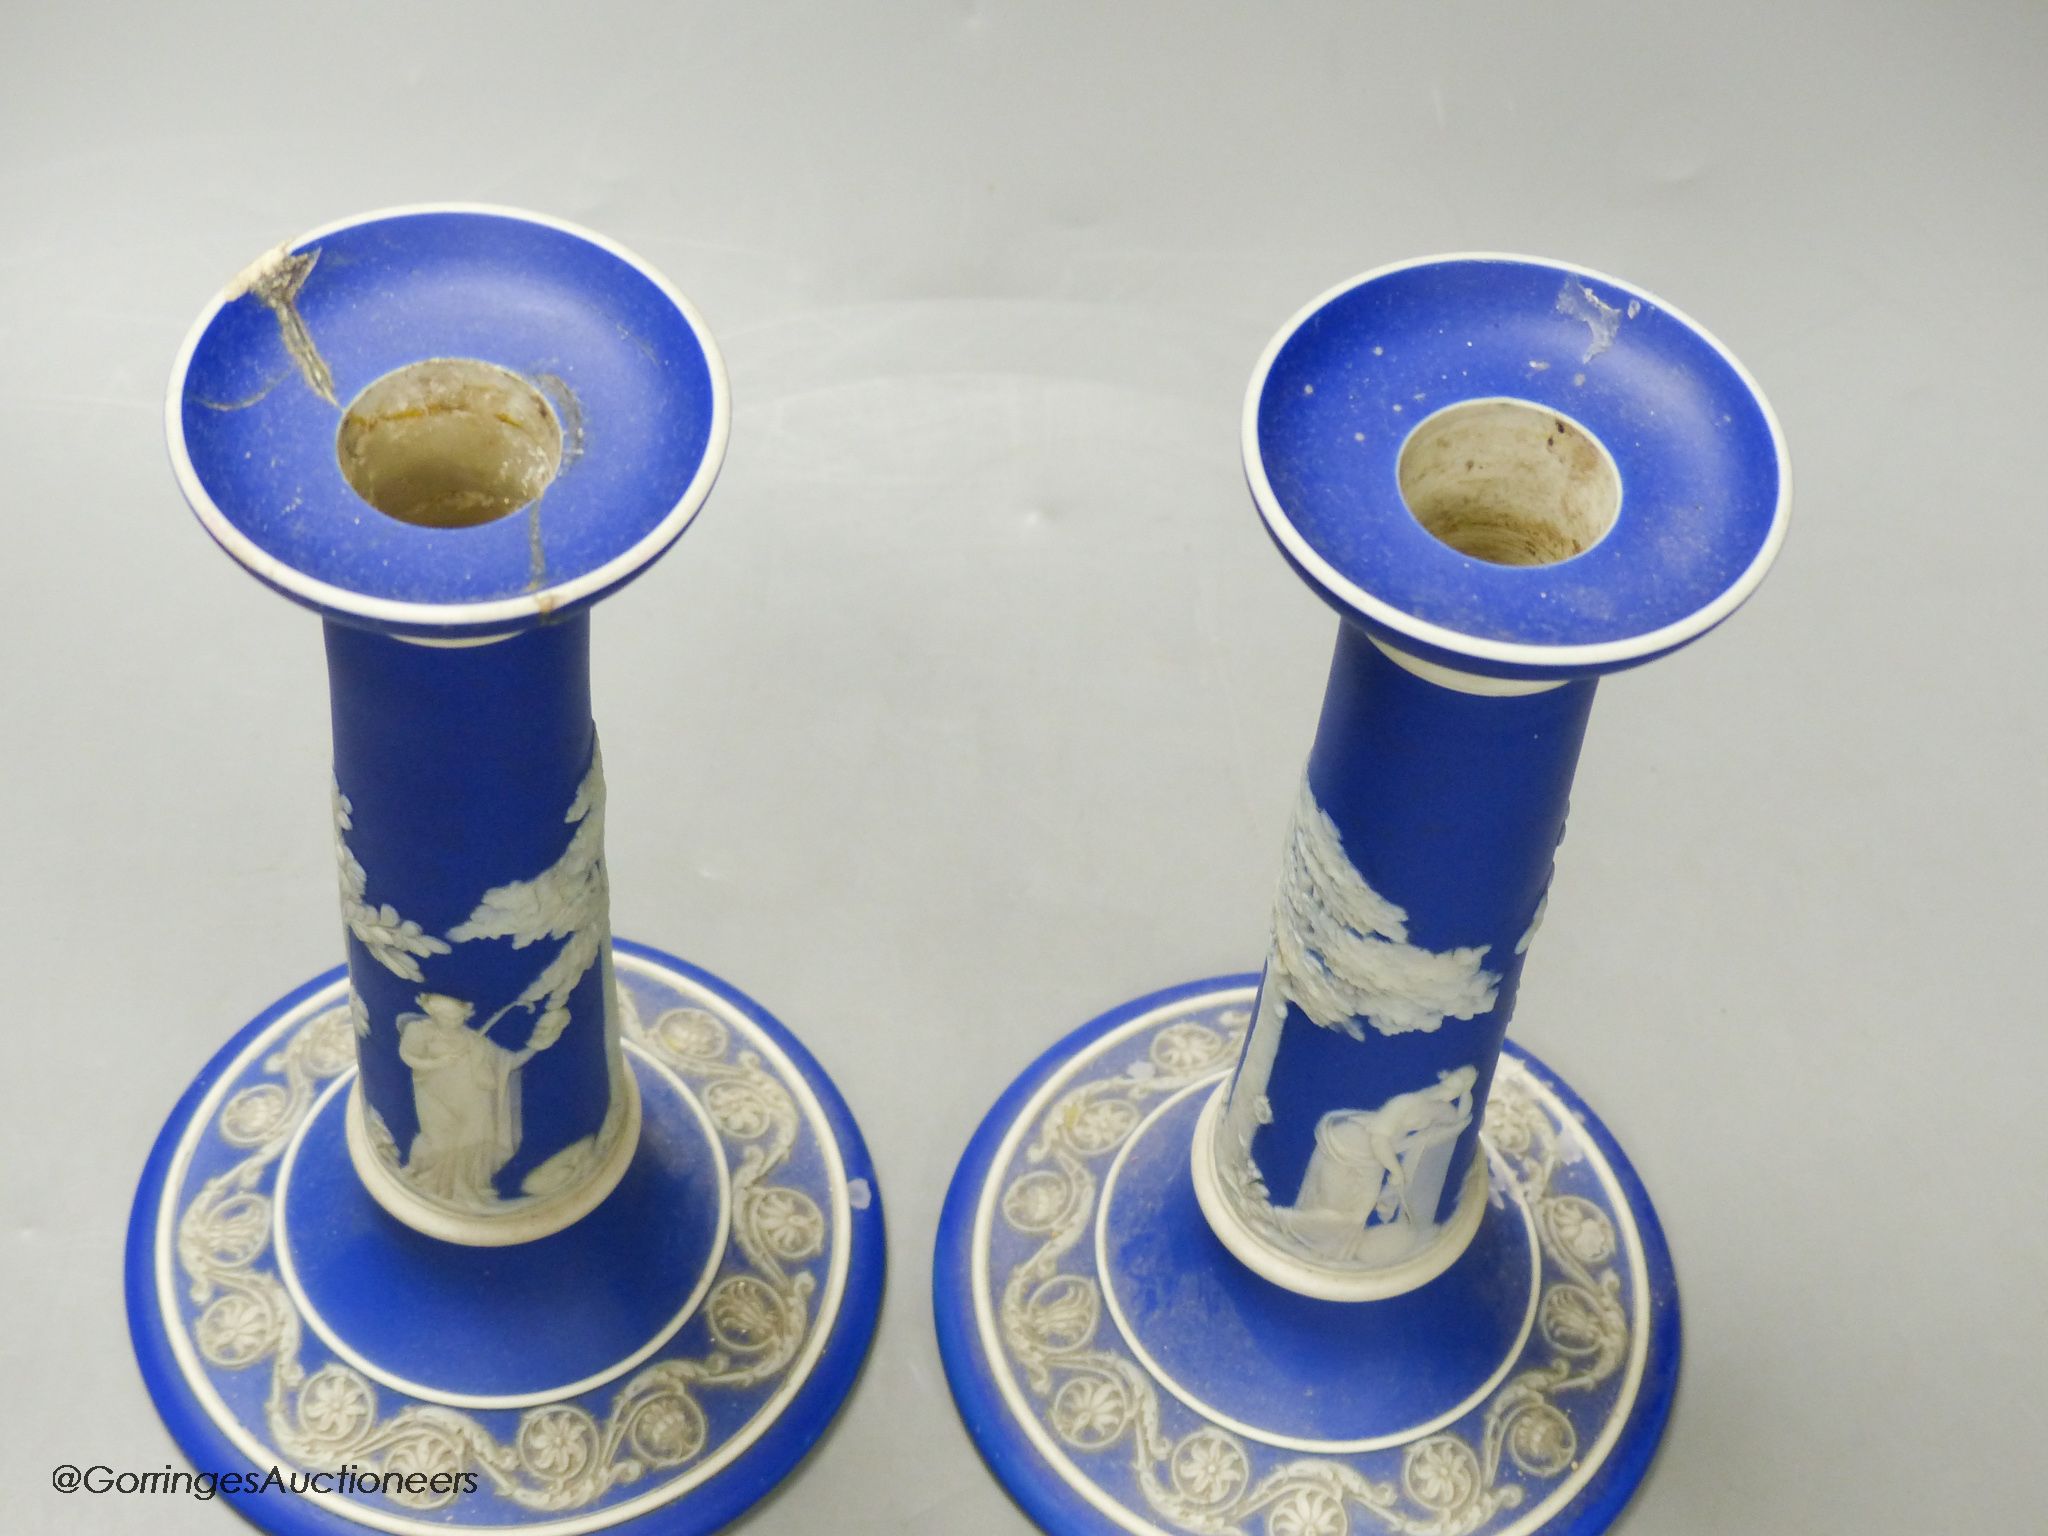 A pair of 19th century Wedgwood blue jasper candlesticks, height 20cm (a.f.) - Image 3 of 4